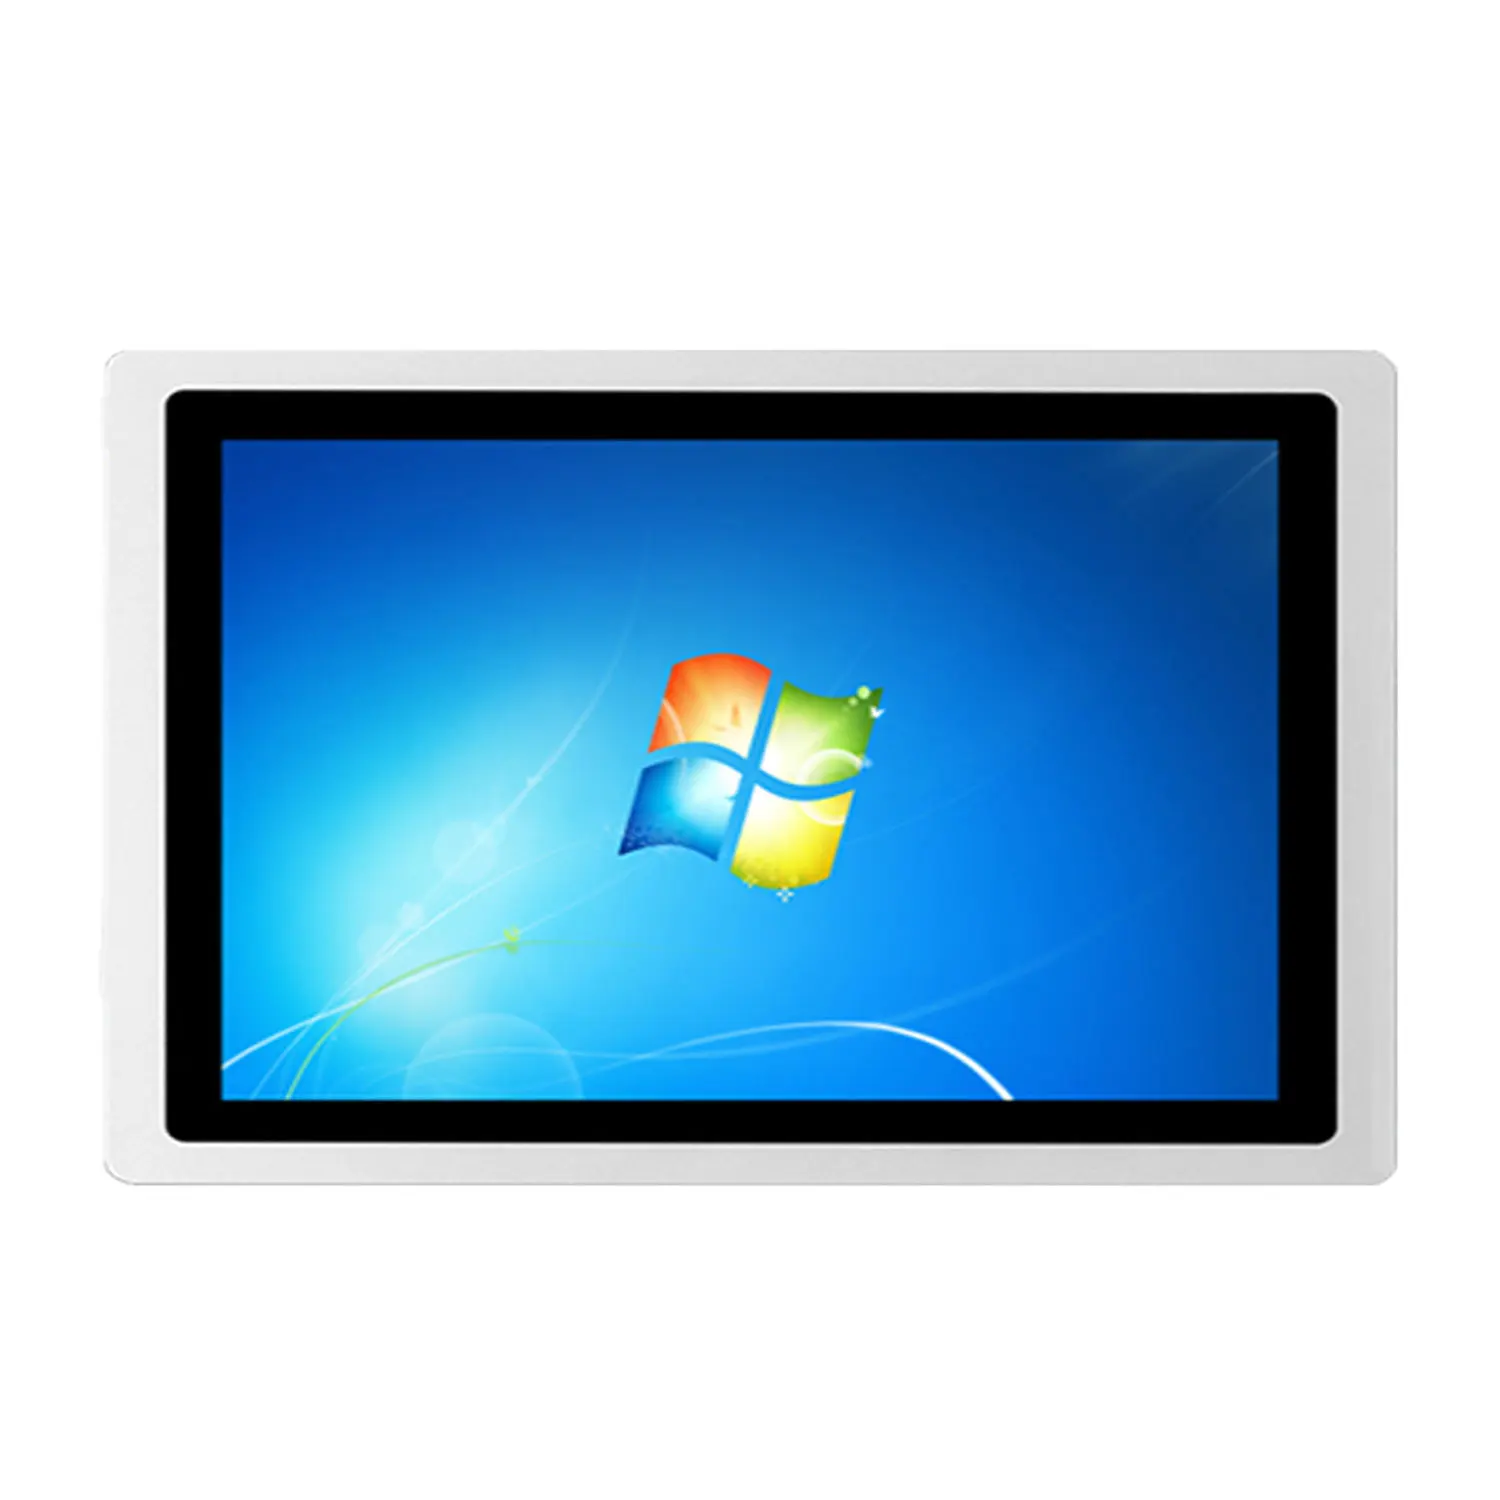 10“12”15 inch Industrial Panel computer capacitive touch screen PC core i3/i5/i7 4G RAM 64G SSD with wifi all in one pc 1024*768